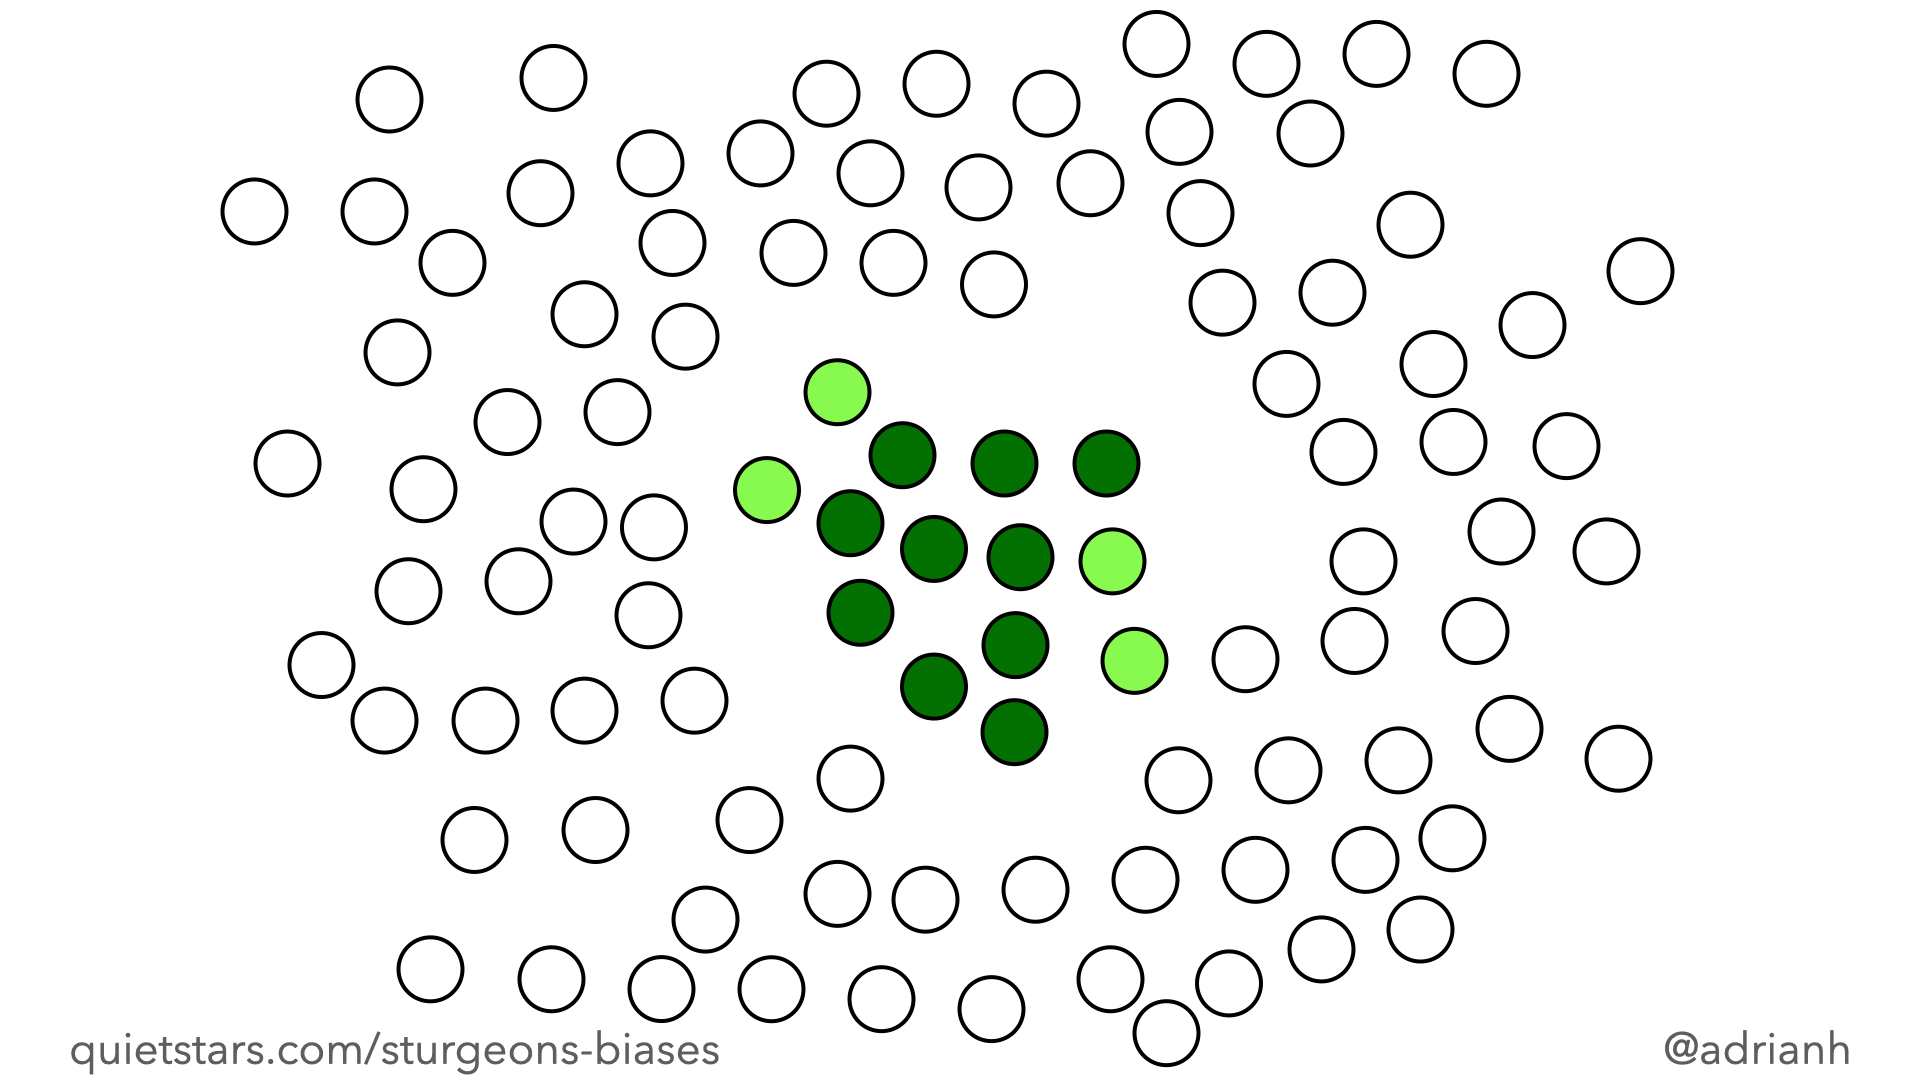 Ten green circles are clustered in the middle of the image, with four lighter green circles next to them. They are surrounded by ninety white circles distributed at random. There is a gap surrounding the green circles — a moat — as if they have pushed the white ones back.